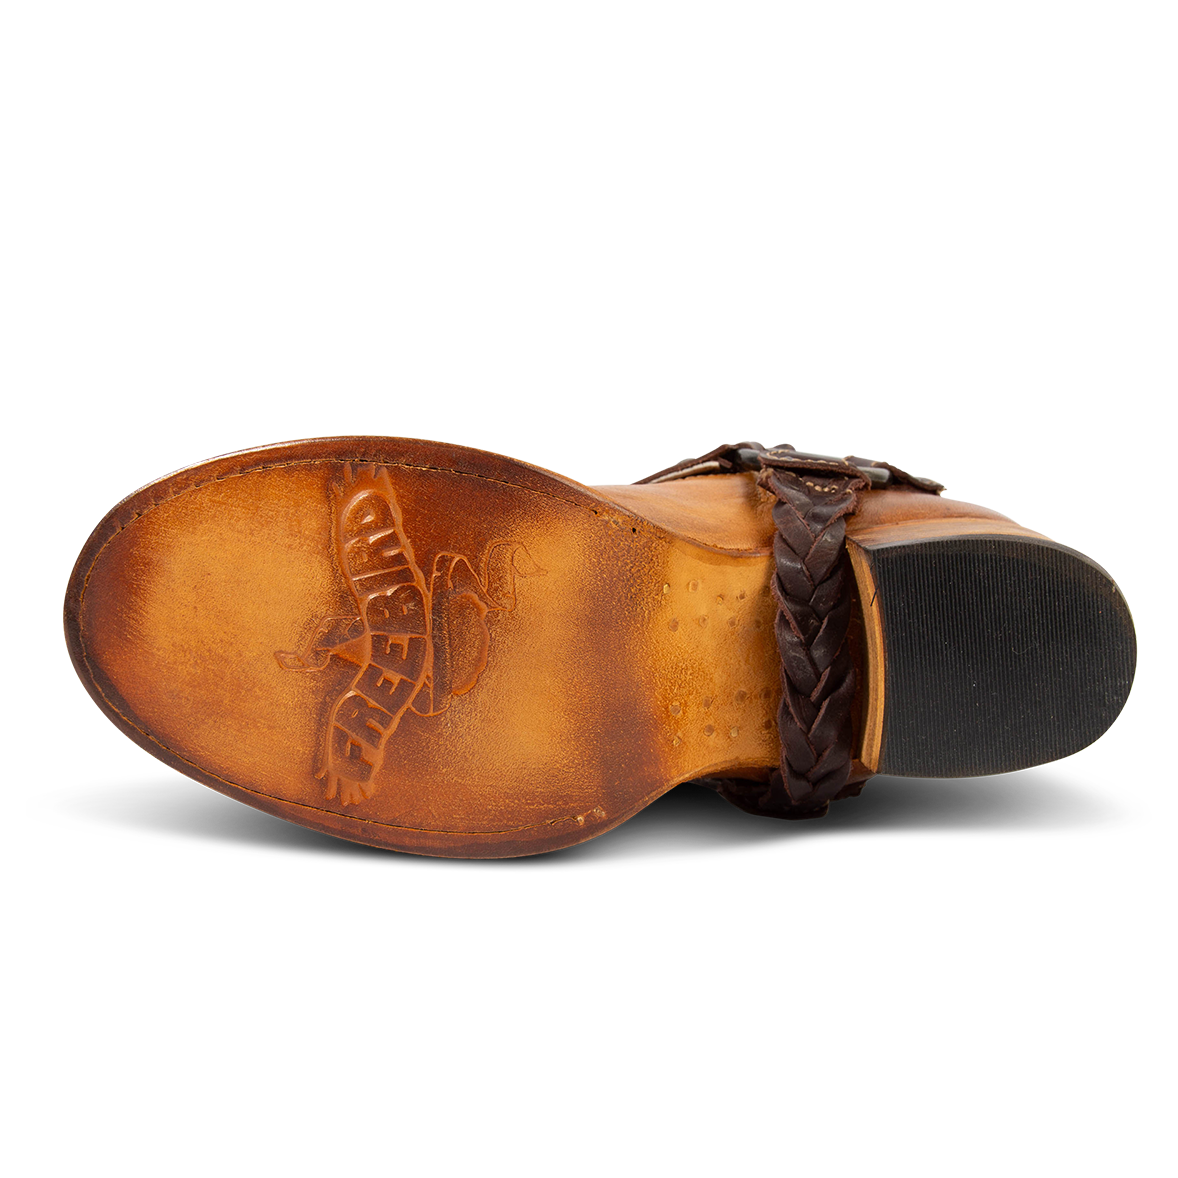 Leather sole imprinted with FREEBIRD on women's Clover wheat boot